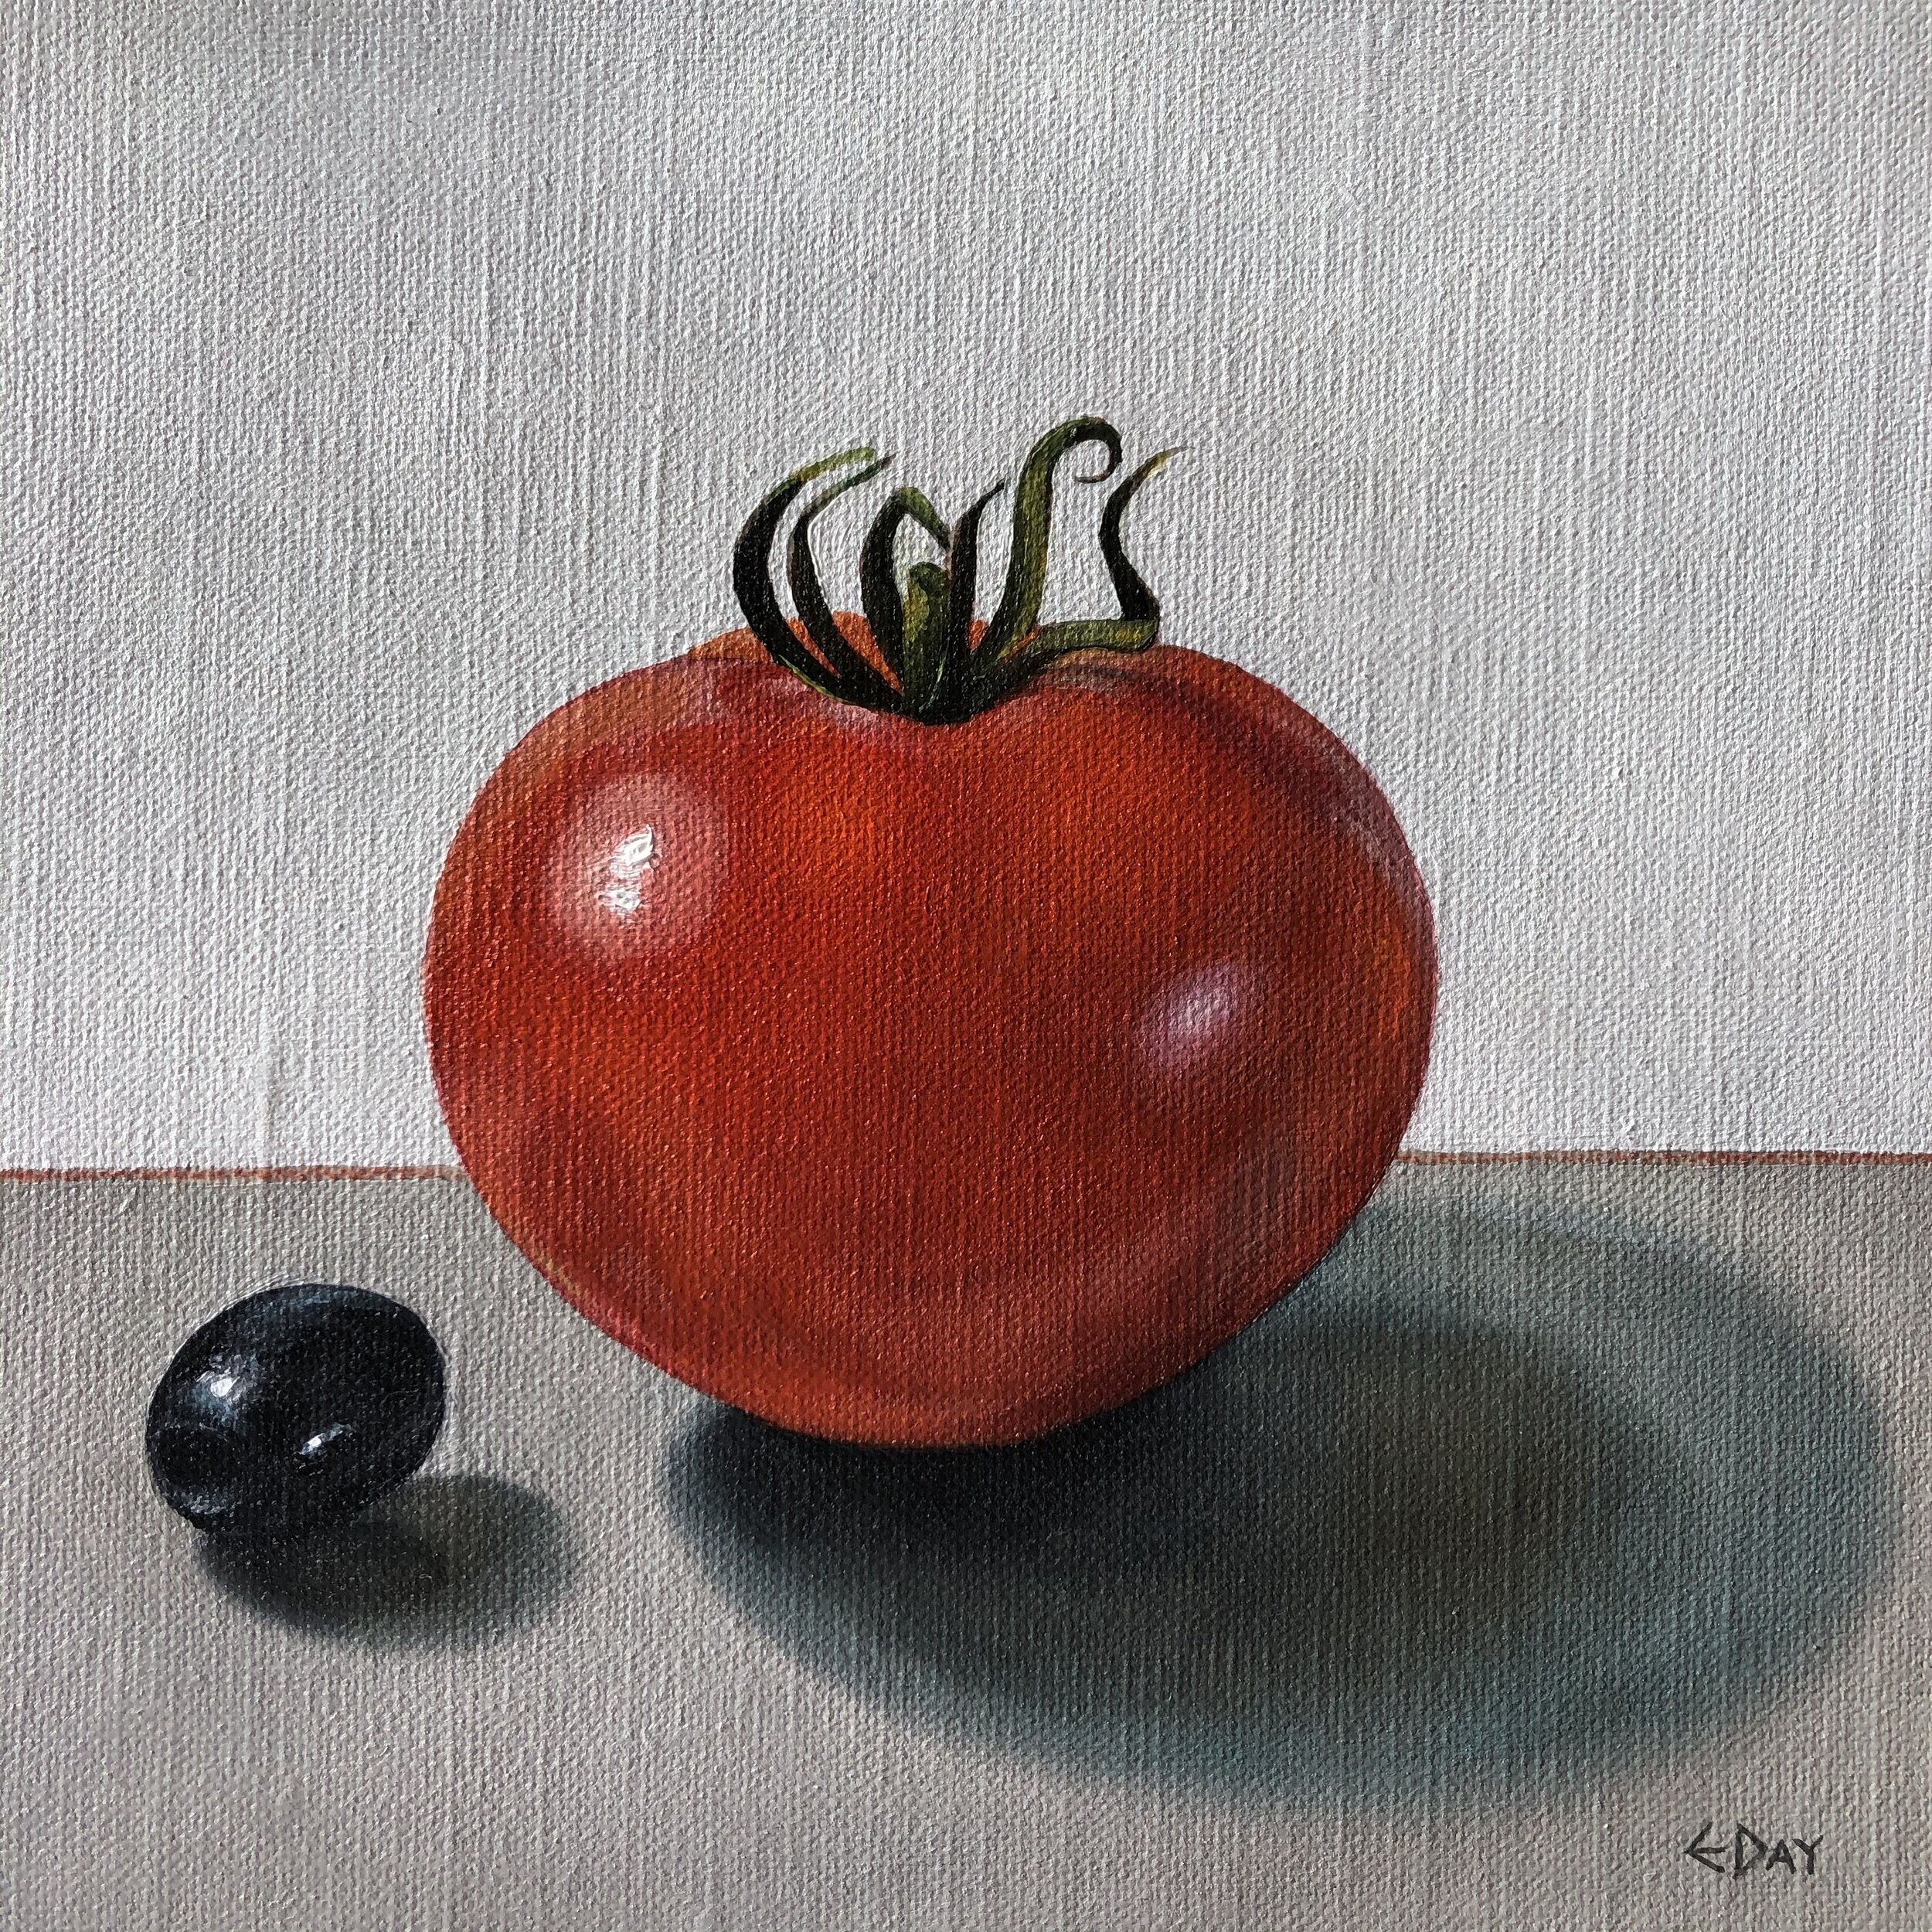 Tomato with black olive